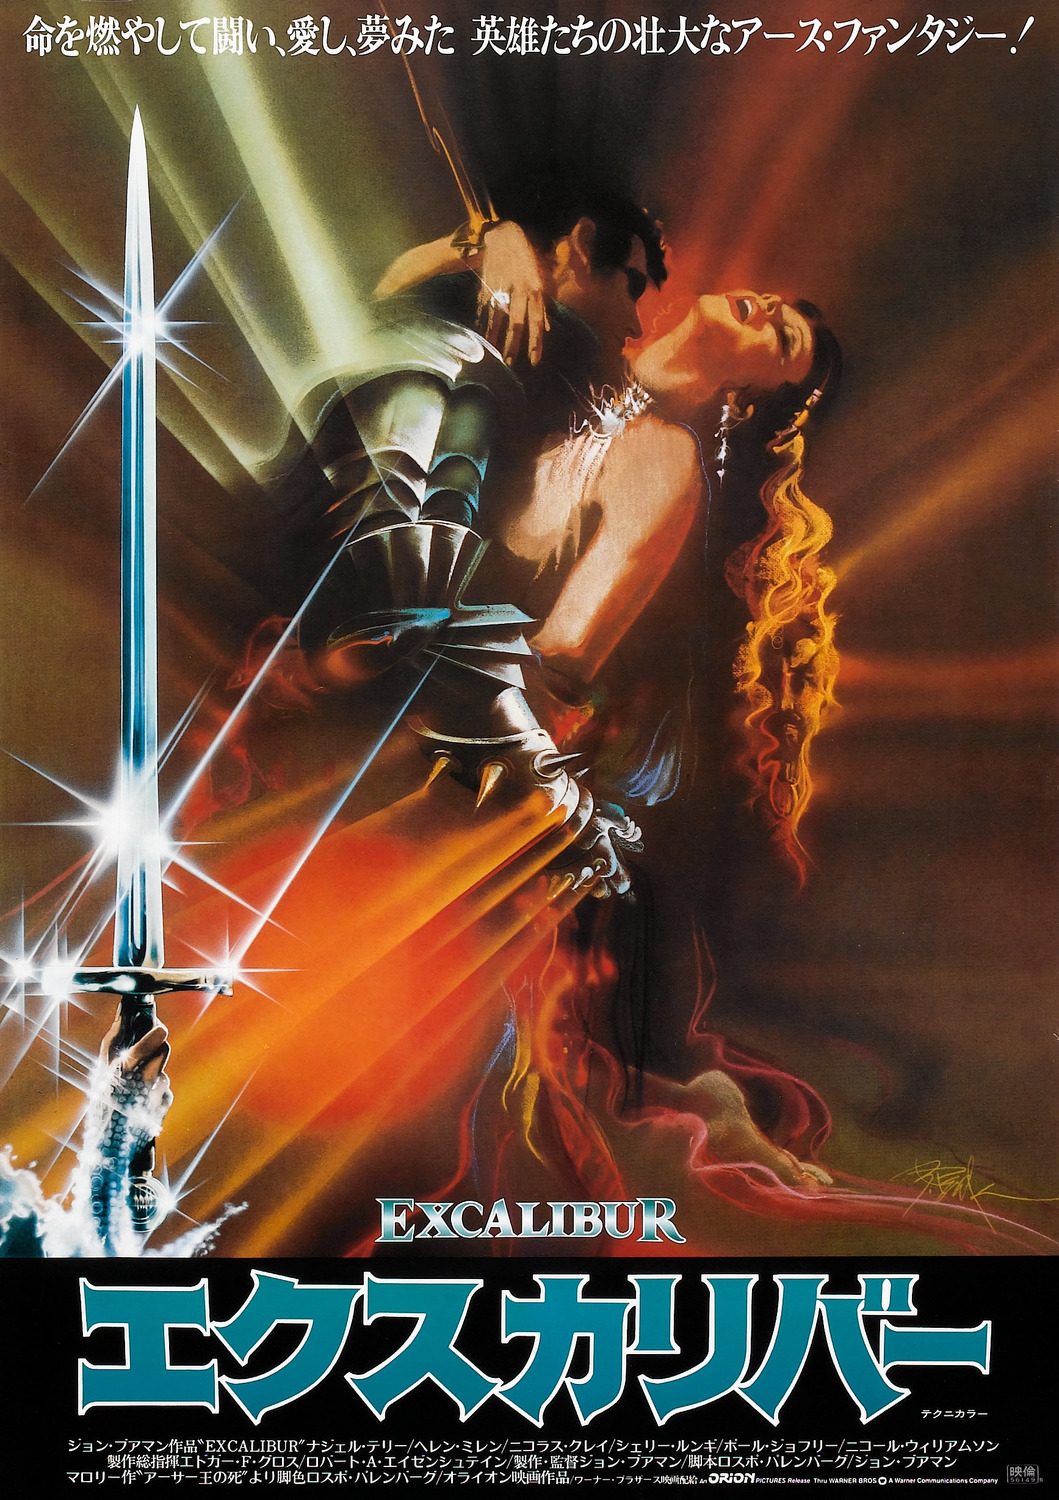 Extra Large Movie Poster Image for Excalibur (#5 of 5)